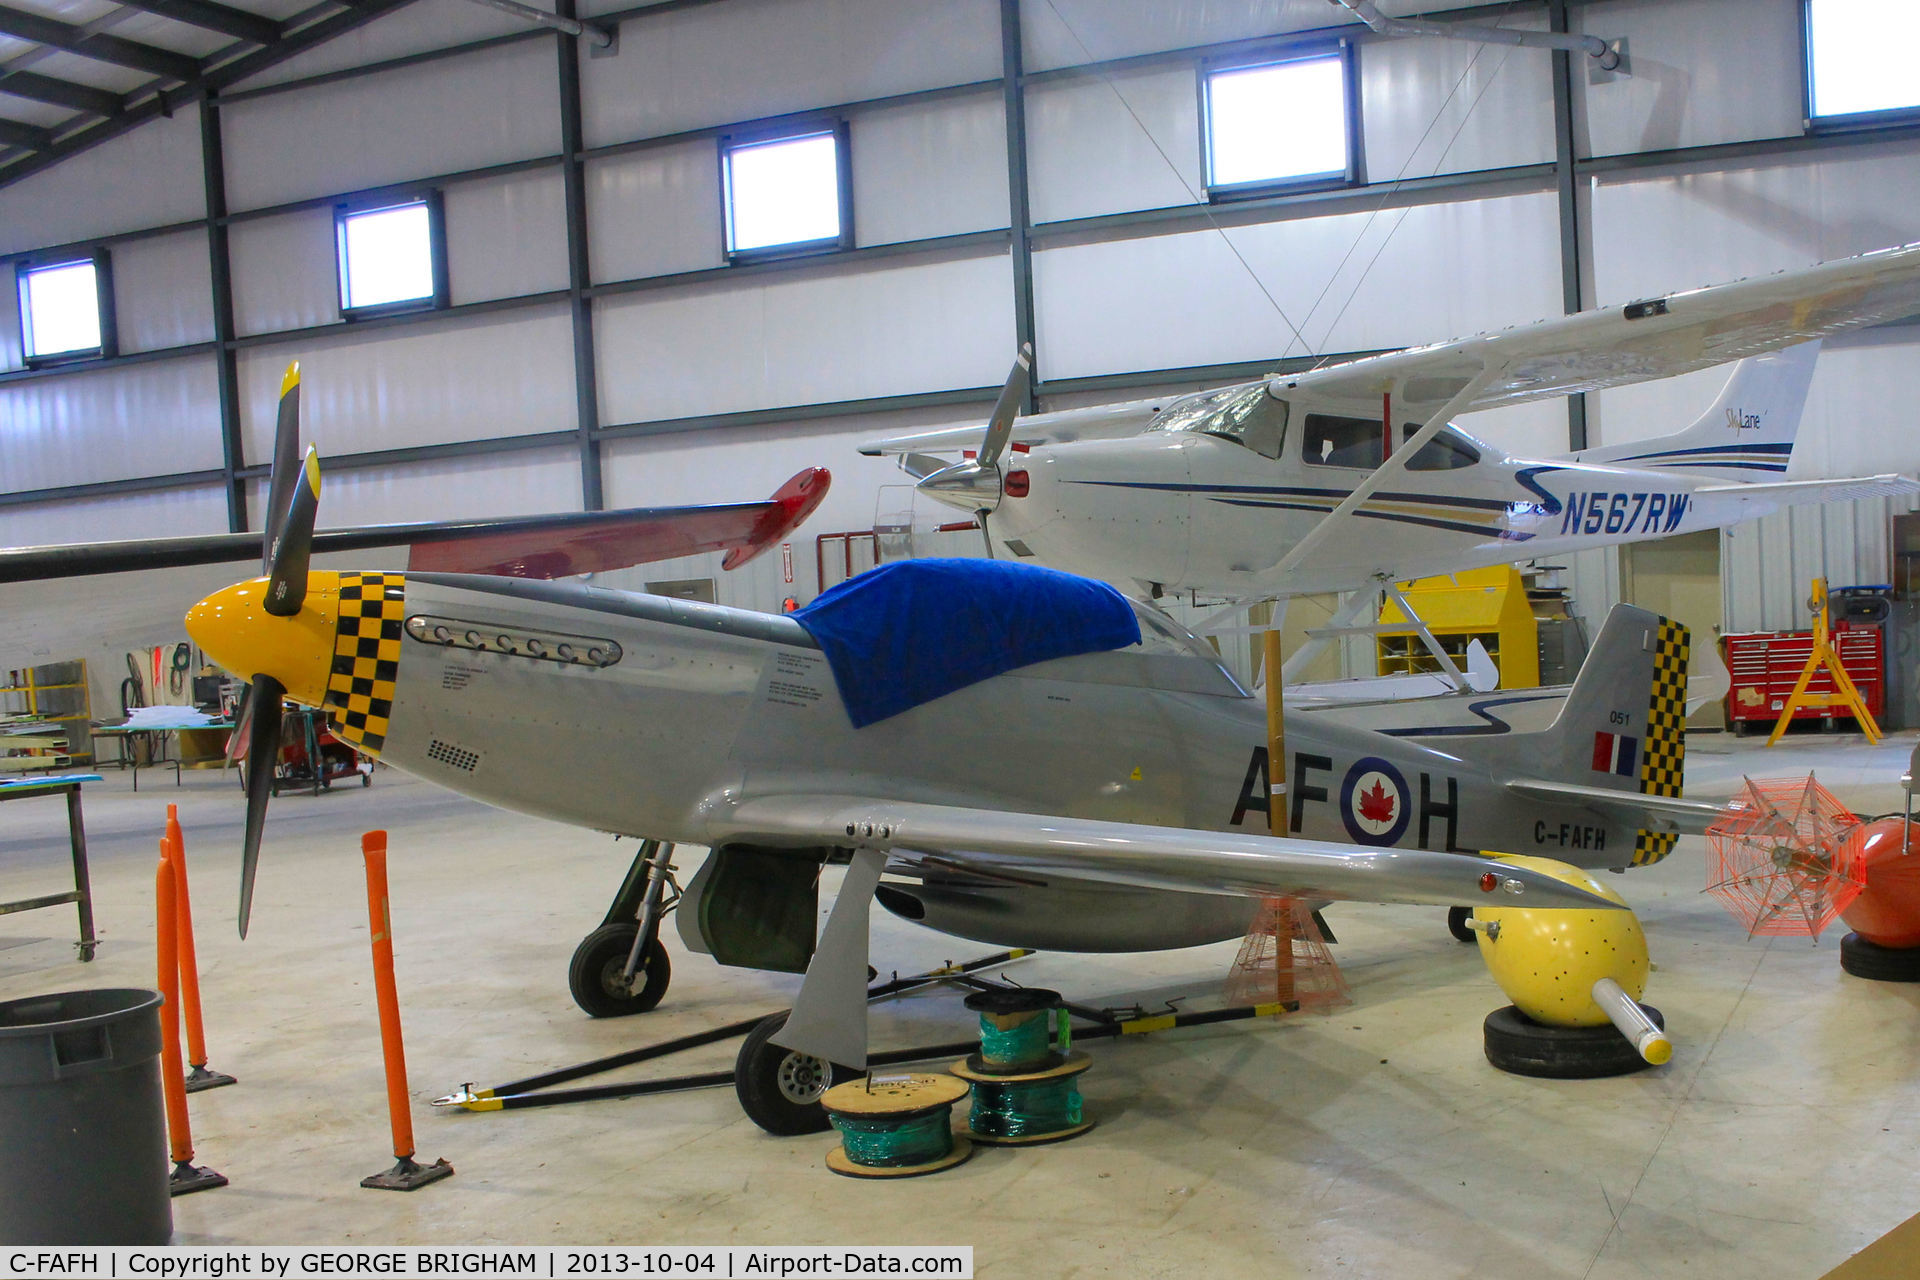 C-FAFH, 1999 Mustang F.E.W. TP-51 C/N 0051, Tucked into a hangar at Muskoka airport, Ontario